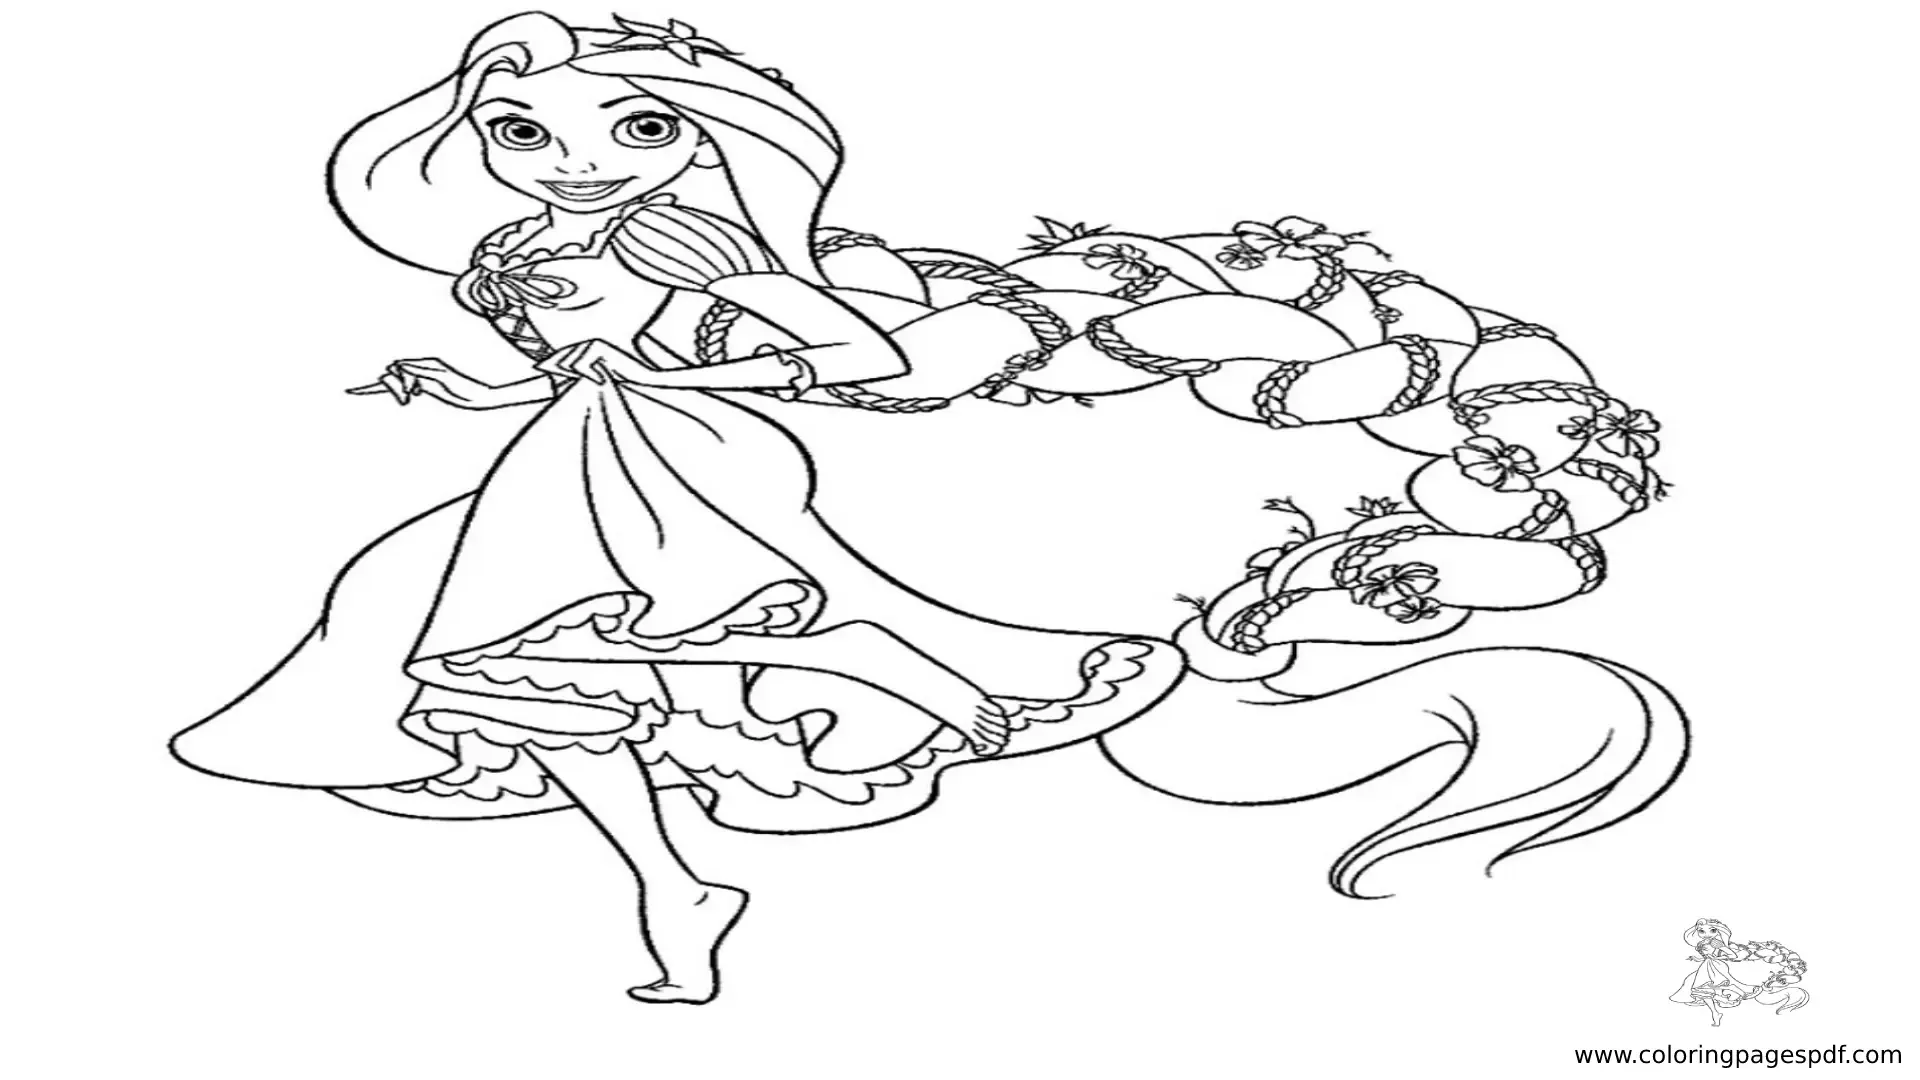 Coloring Pages Of Rapunzel With Braid Hair